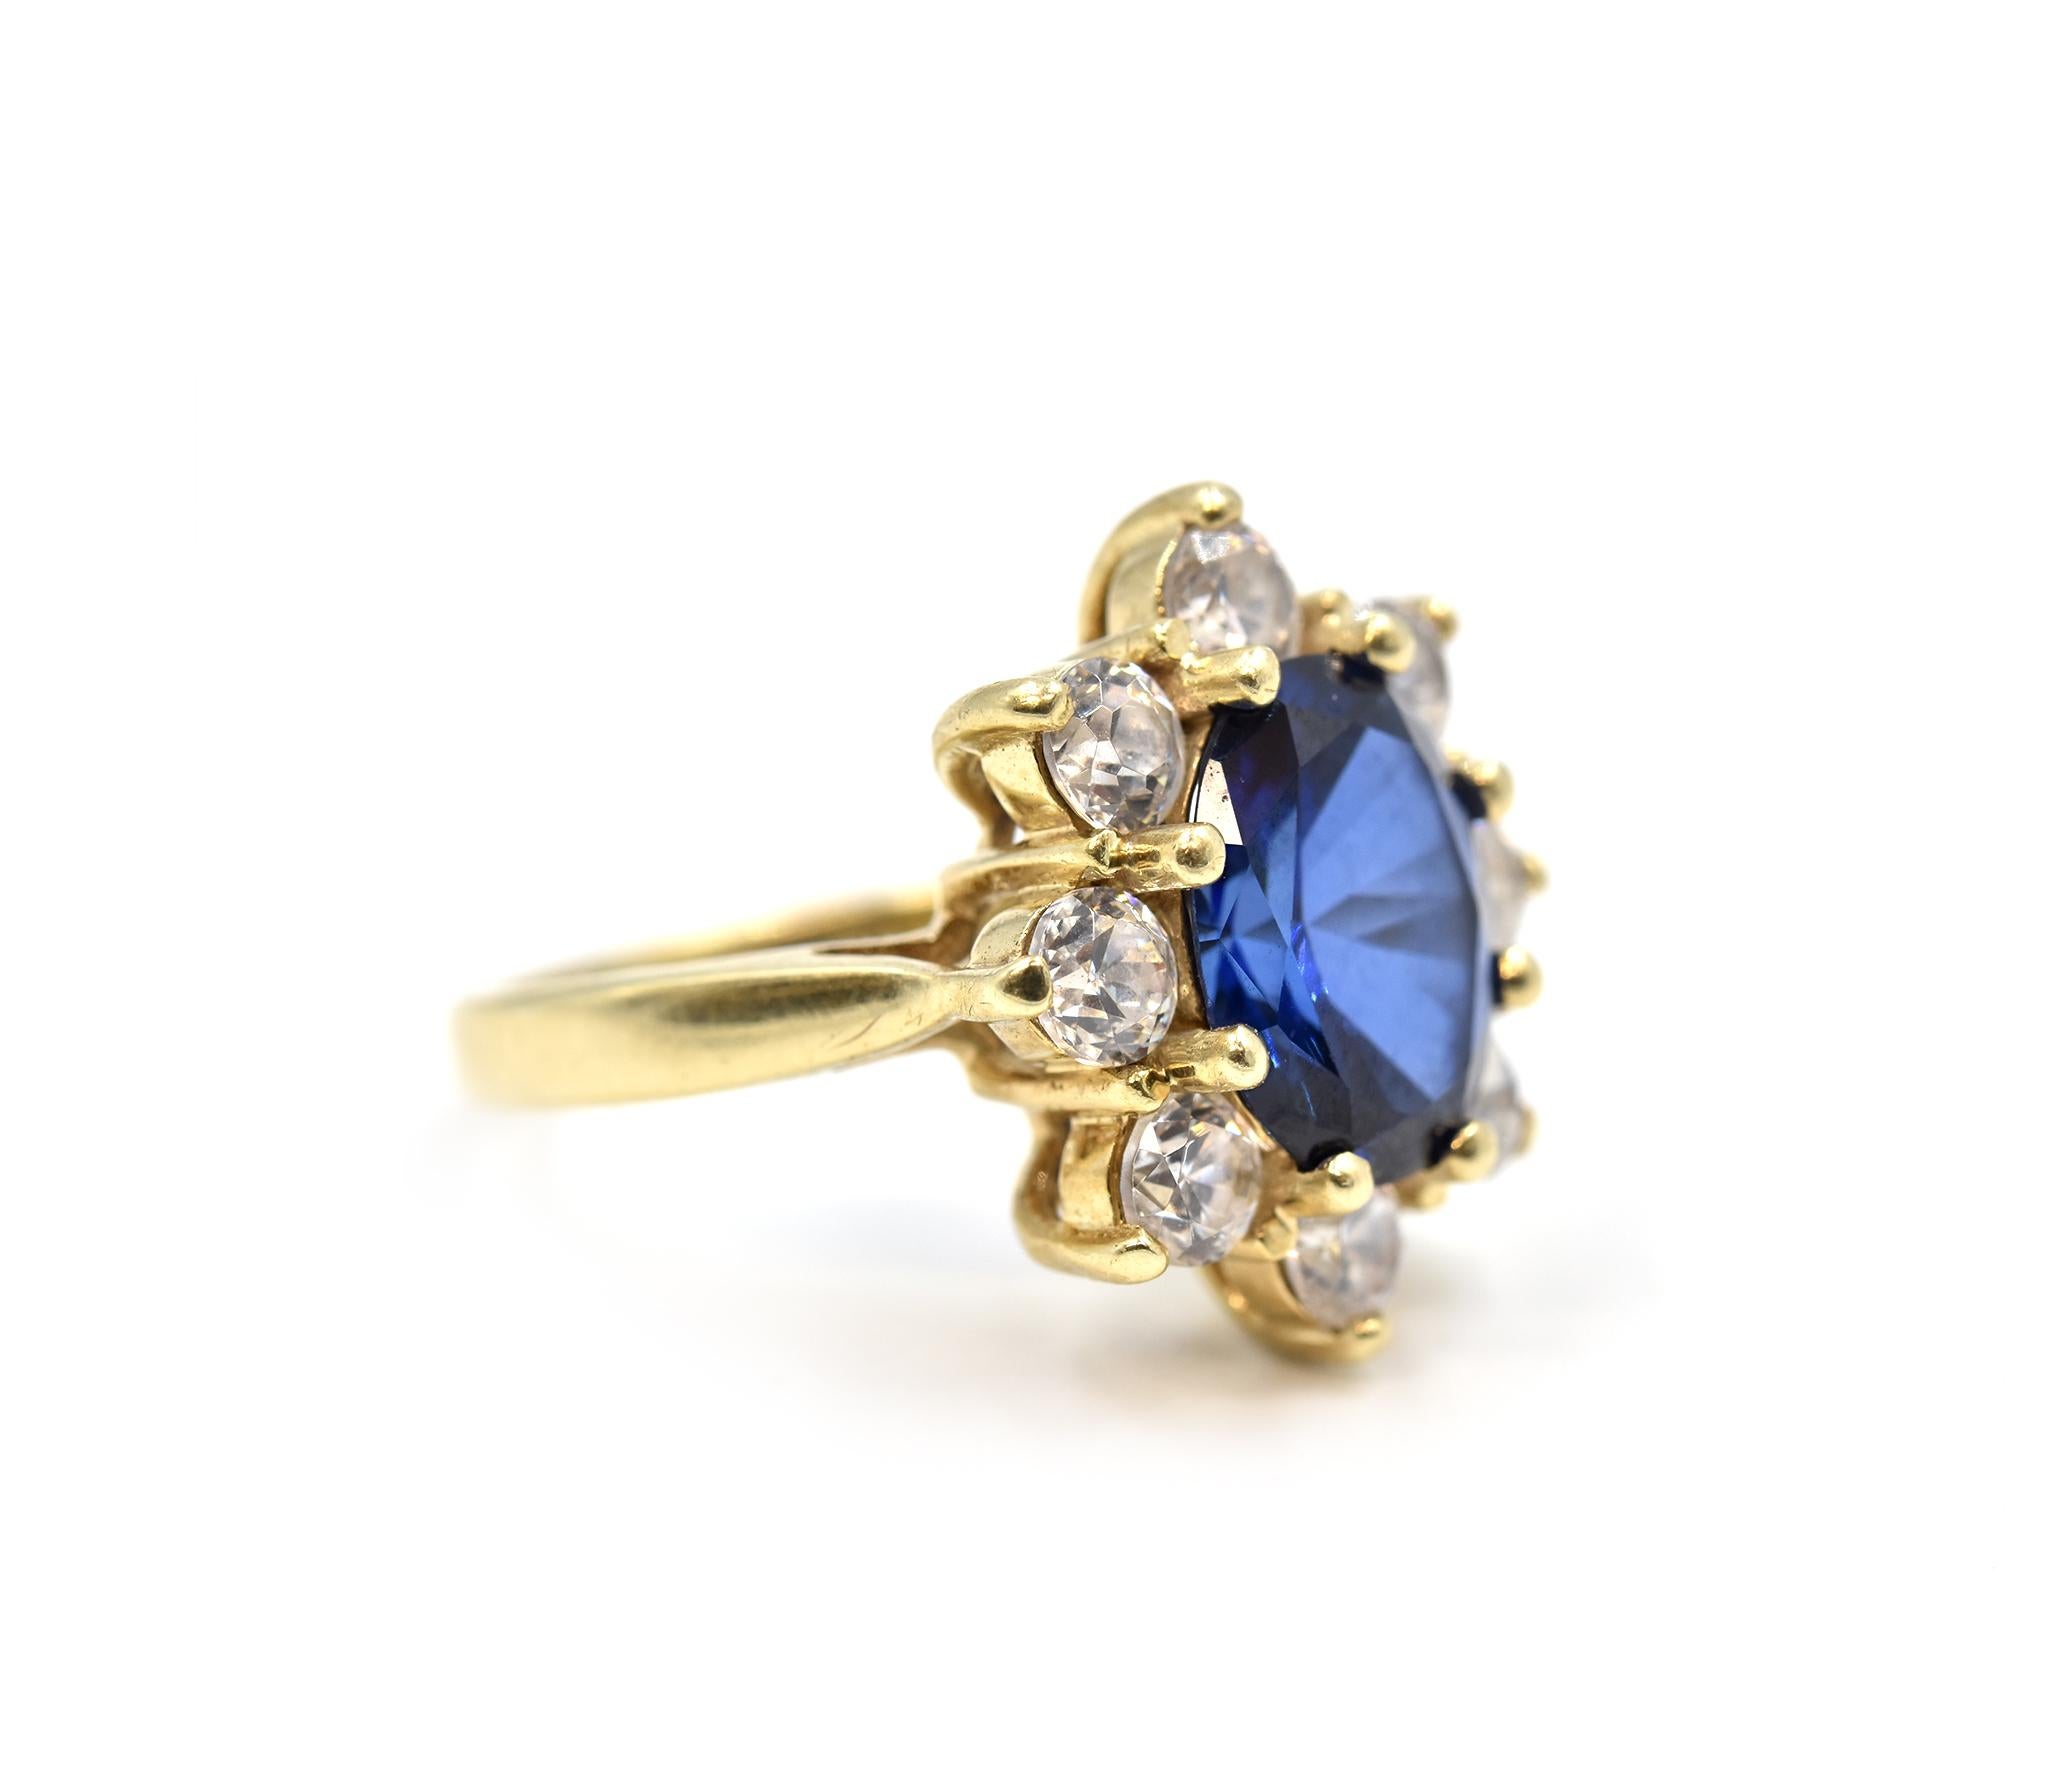 Designer: custom design
Material: 10k yellow gold
Sapphire: 2.77 carat weight oval blue sapphire gemstone
Diamonds: eight round brilliant cut diamonds = 0.96 carat total weight
Dimensions: ring is 5/8-inch long and 1/2-inch wide
Ring Size: 4 1/4